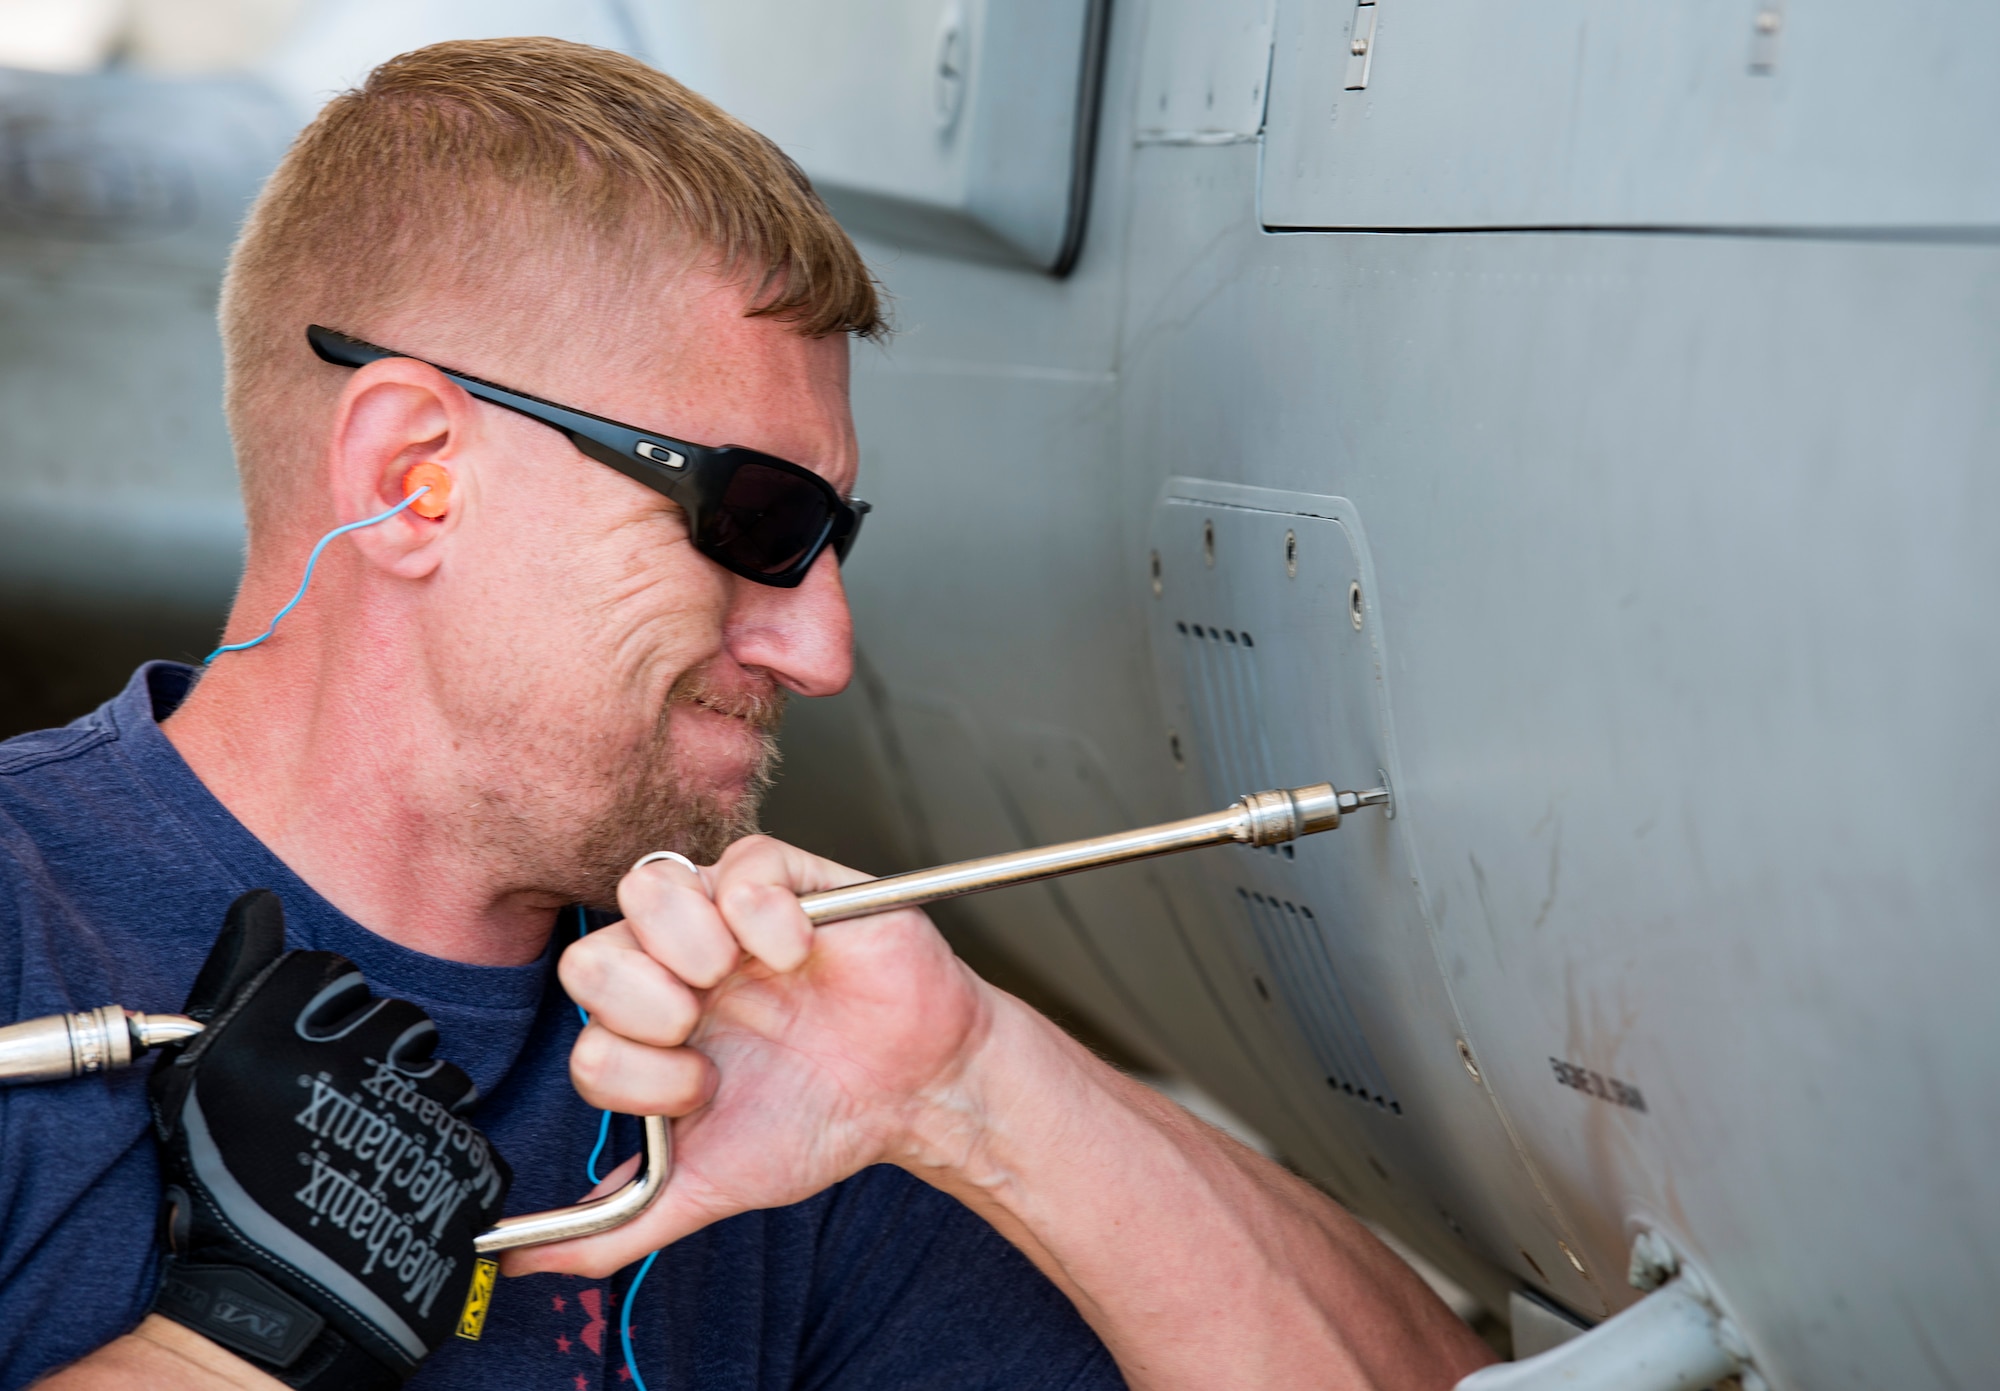 Joe Johnson, Sierra Nevada Corporation (SNC) avionics technician, unscrews an access panel on an A-29 Super Tucano, April 26, 2018, at Moody Air Force Base, Ga. The 81st Fighter Squadron received the aircraft to help continue the Afghan light air support training mission, which ultimately provides Afghan pilots with the capabilities of finding, tracking, and attacking targets either on their own or in support of ground forces. The aircraft will be used by the Afghan Air Force for close-air attack, air interdiction, escort and armed reconnaissance. SNC is an American privately held electronic systems provider and systems integrator, and are the primary technicians and pilot instructors of the A-29s. (U.S. Air Force photo by Airman 1st Class Erick Requadt)